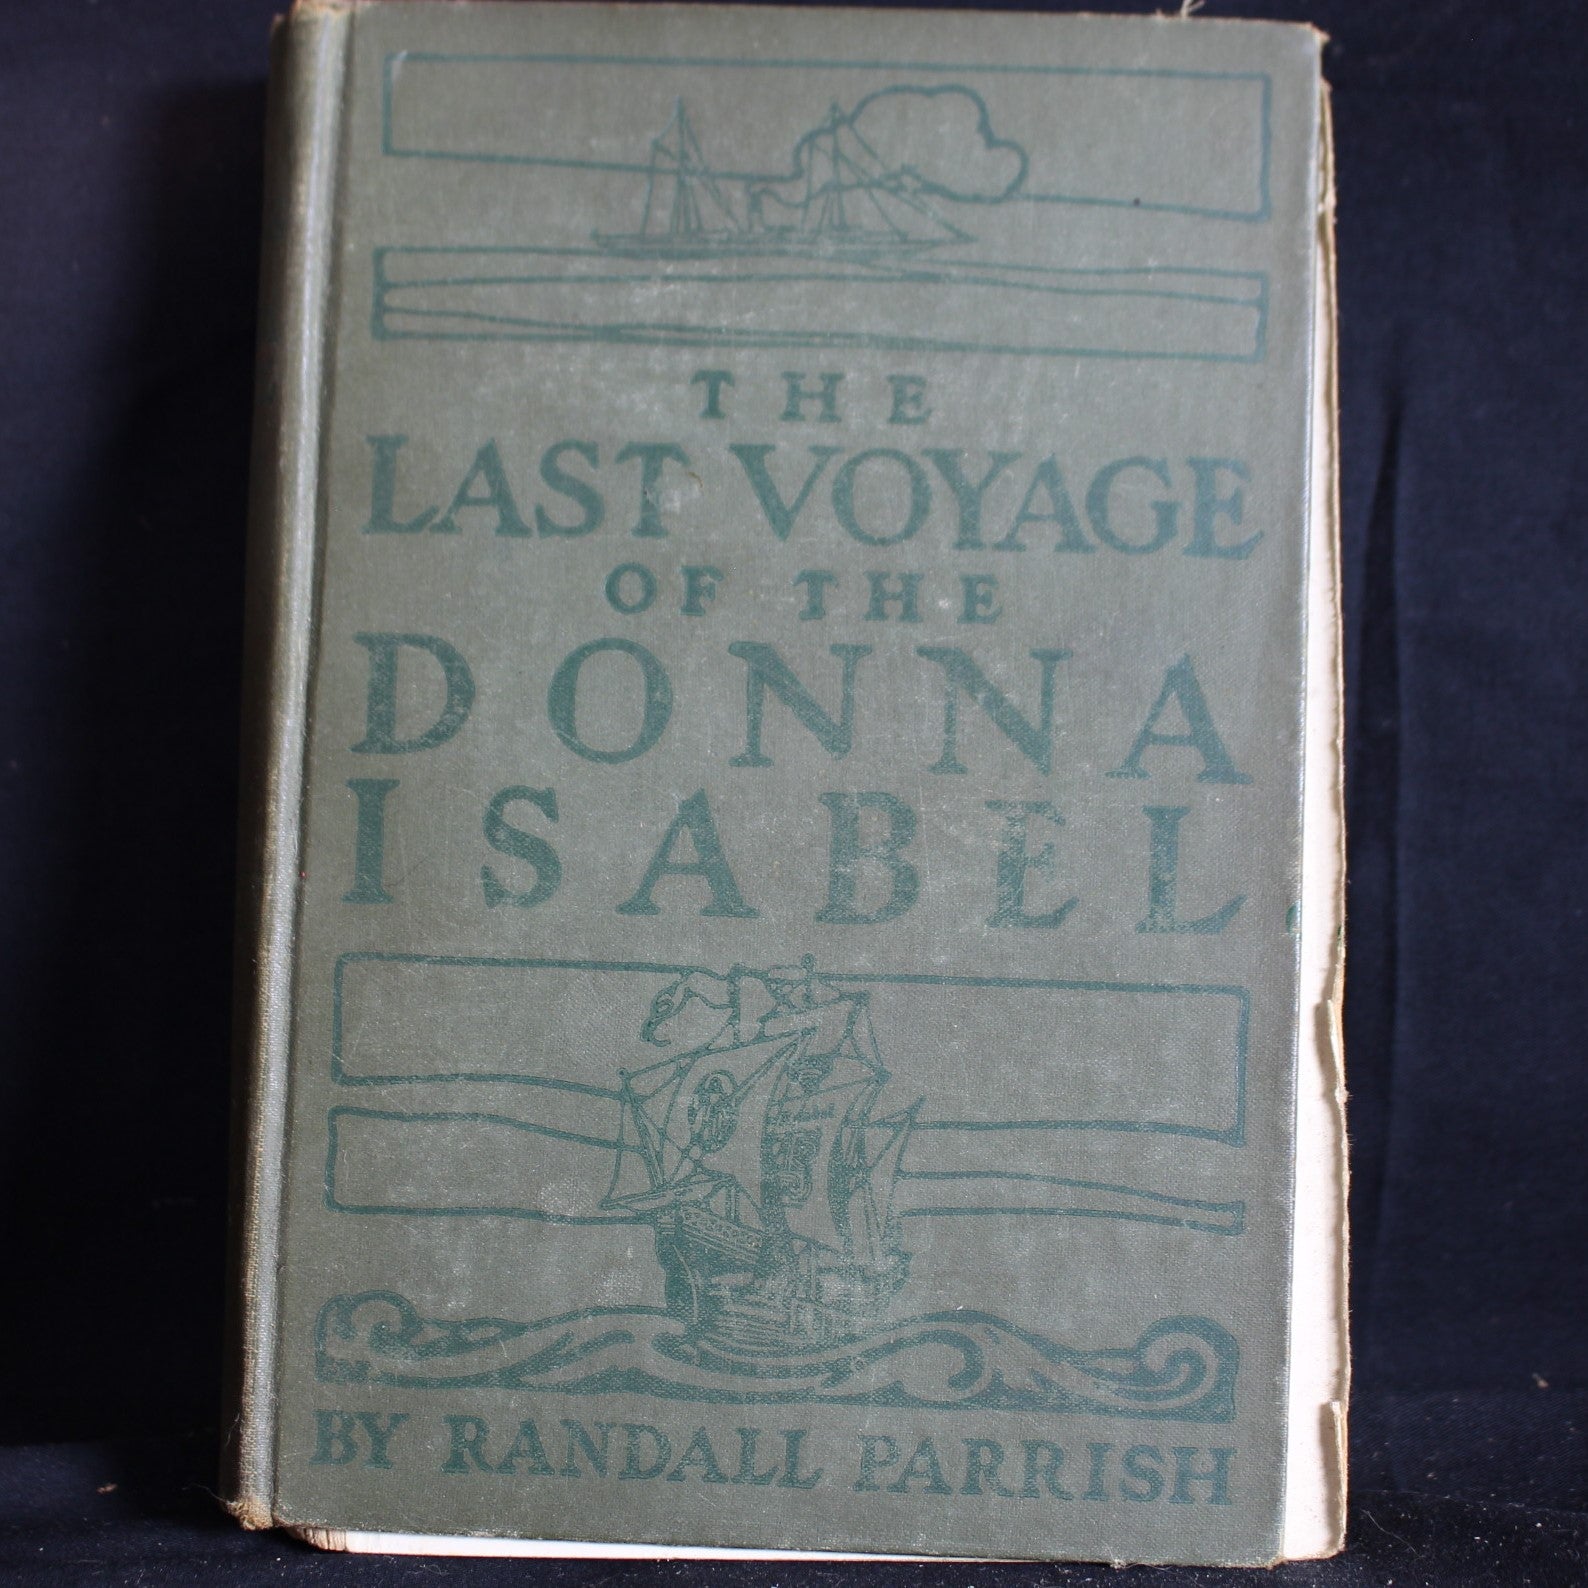 Rare Vintage Hardcover First Edition The Last Voyage of the Donna Isabel: a Romance of the Sea by Randall Parrish, 1908